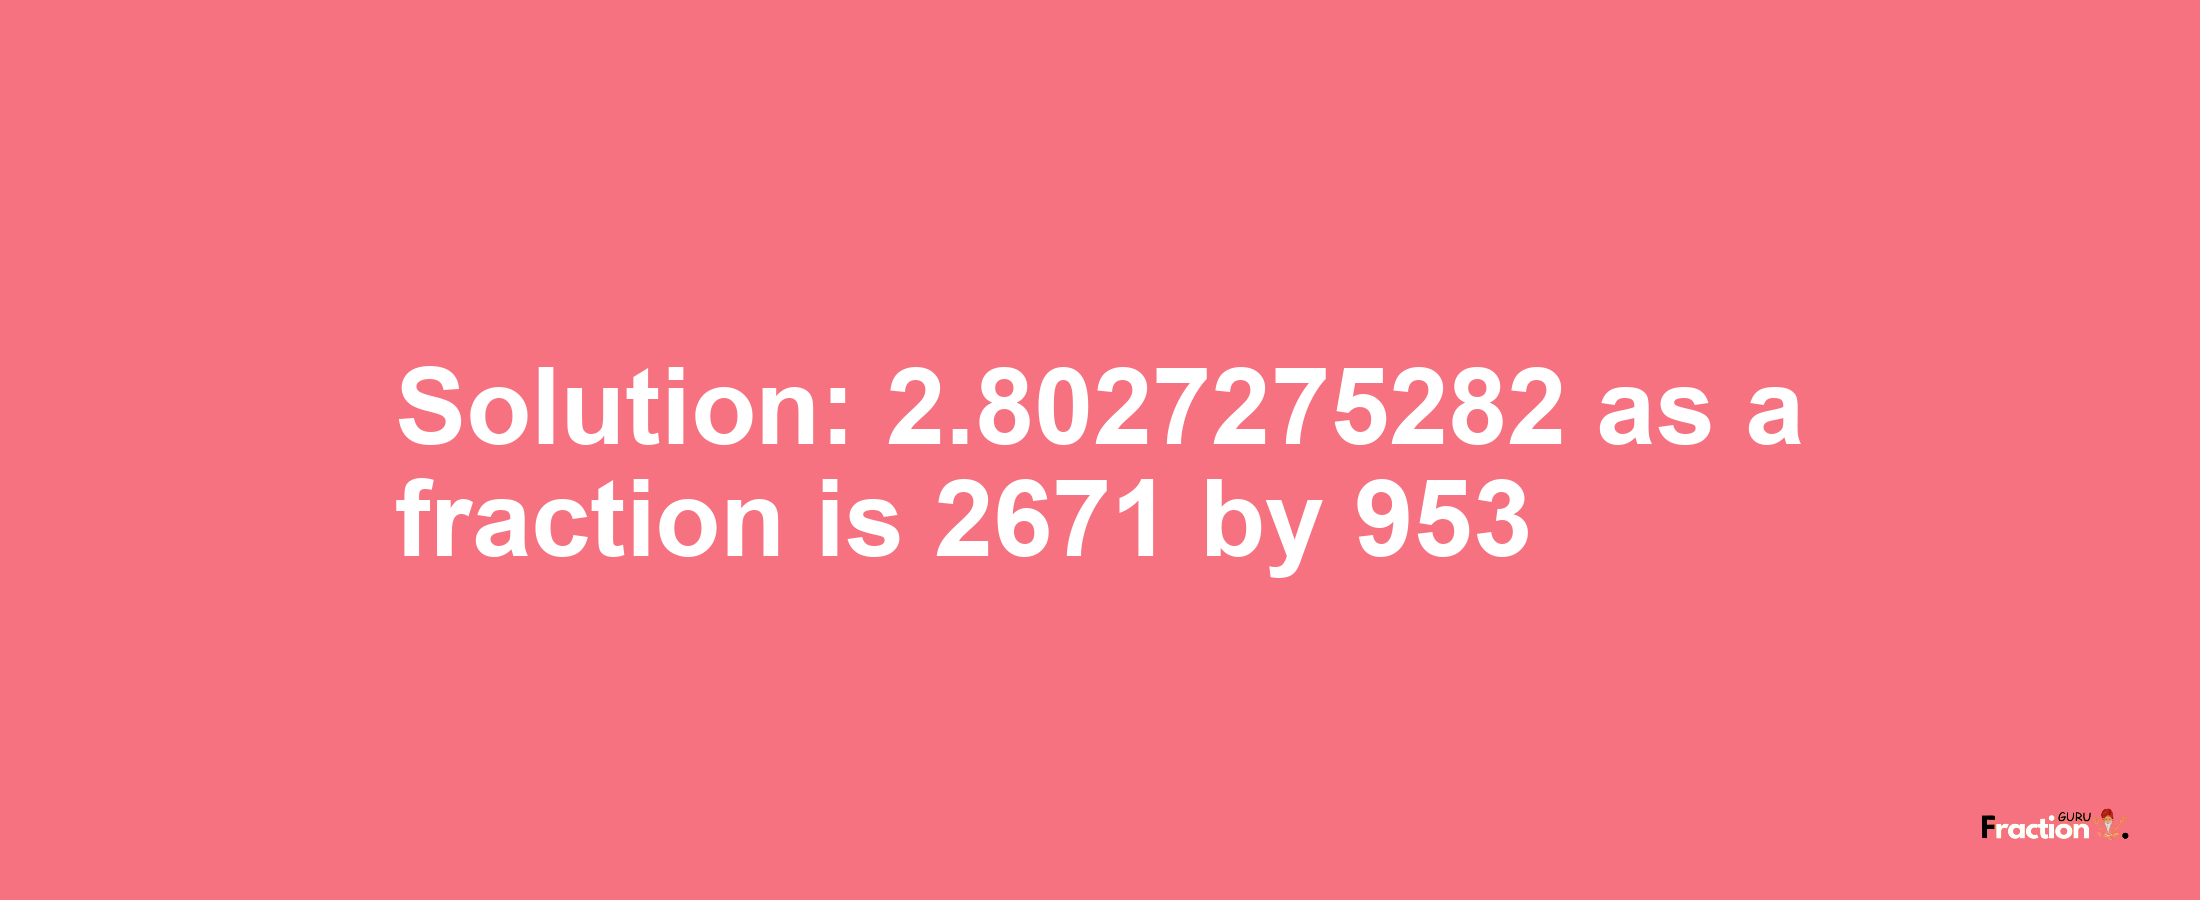 Solution:2.8027275282 as a fraction is 2671/953